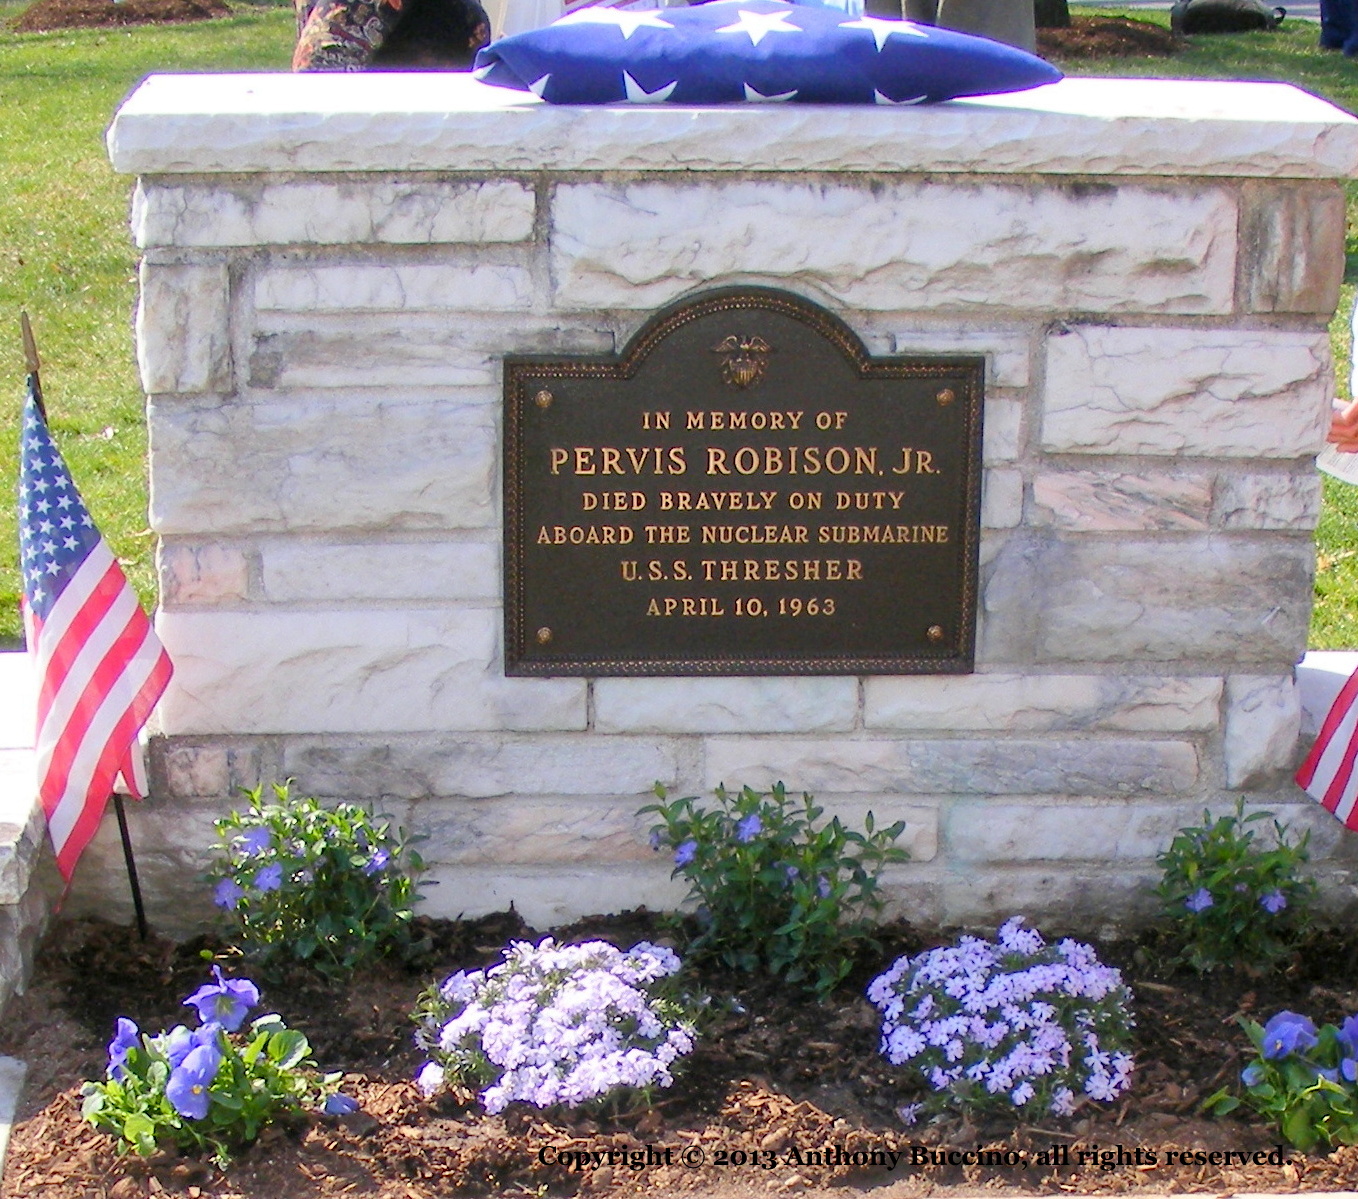 Pervis Robison memorial, Nutley, N.J. -photo by Anthony Buccino 2013